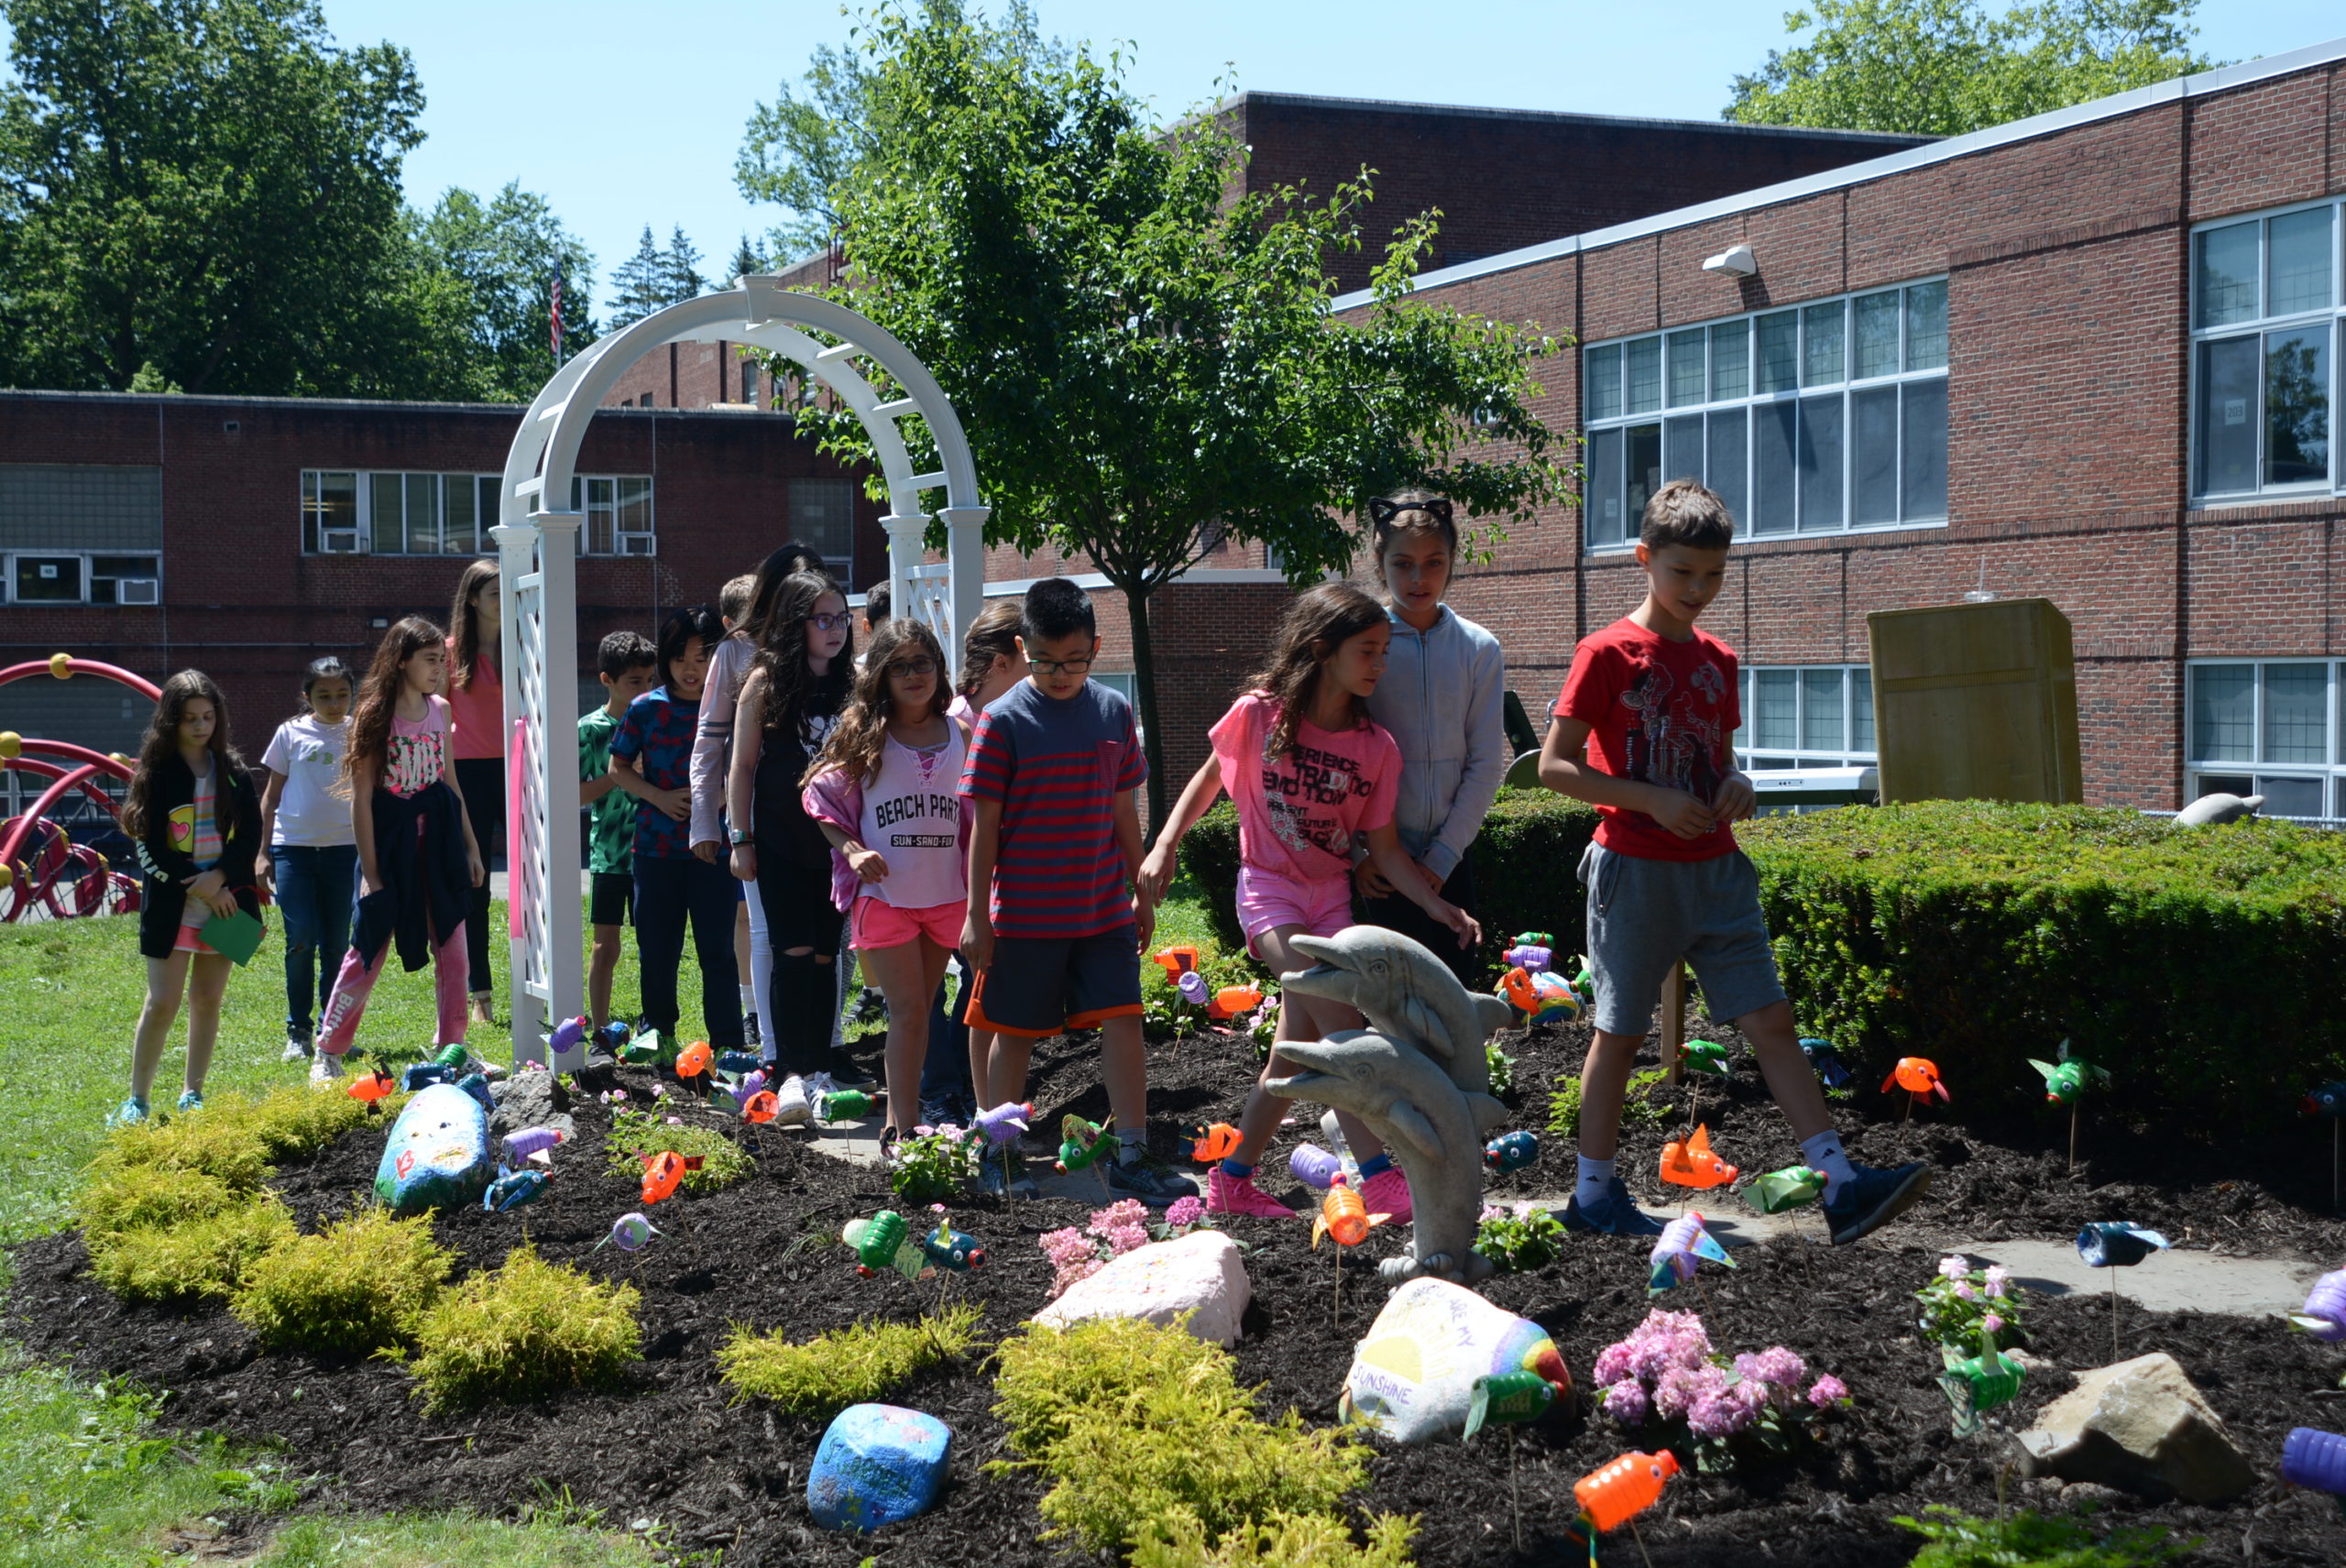 A group of students tour through the newly renovated garden made in honor of Zachary Portnoy, a fourth grader who passed away in 2007. (Photo by Janelle Clausen)